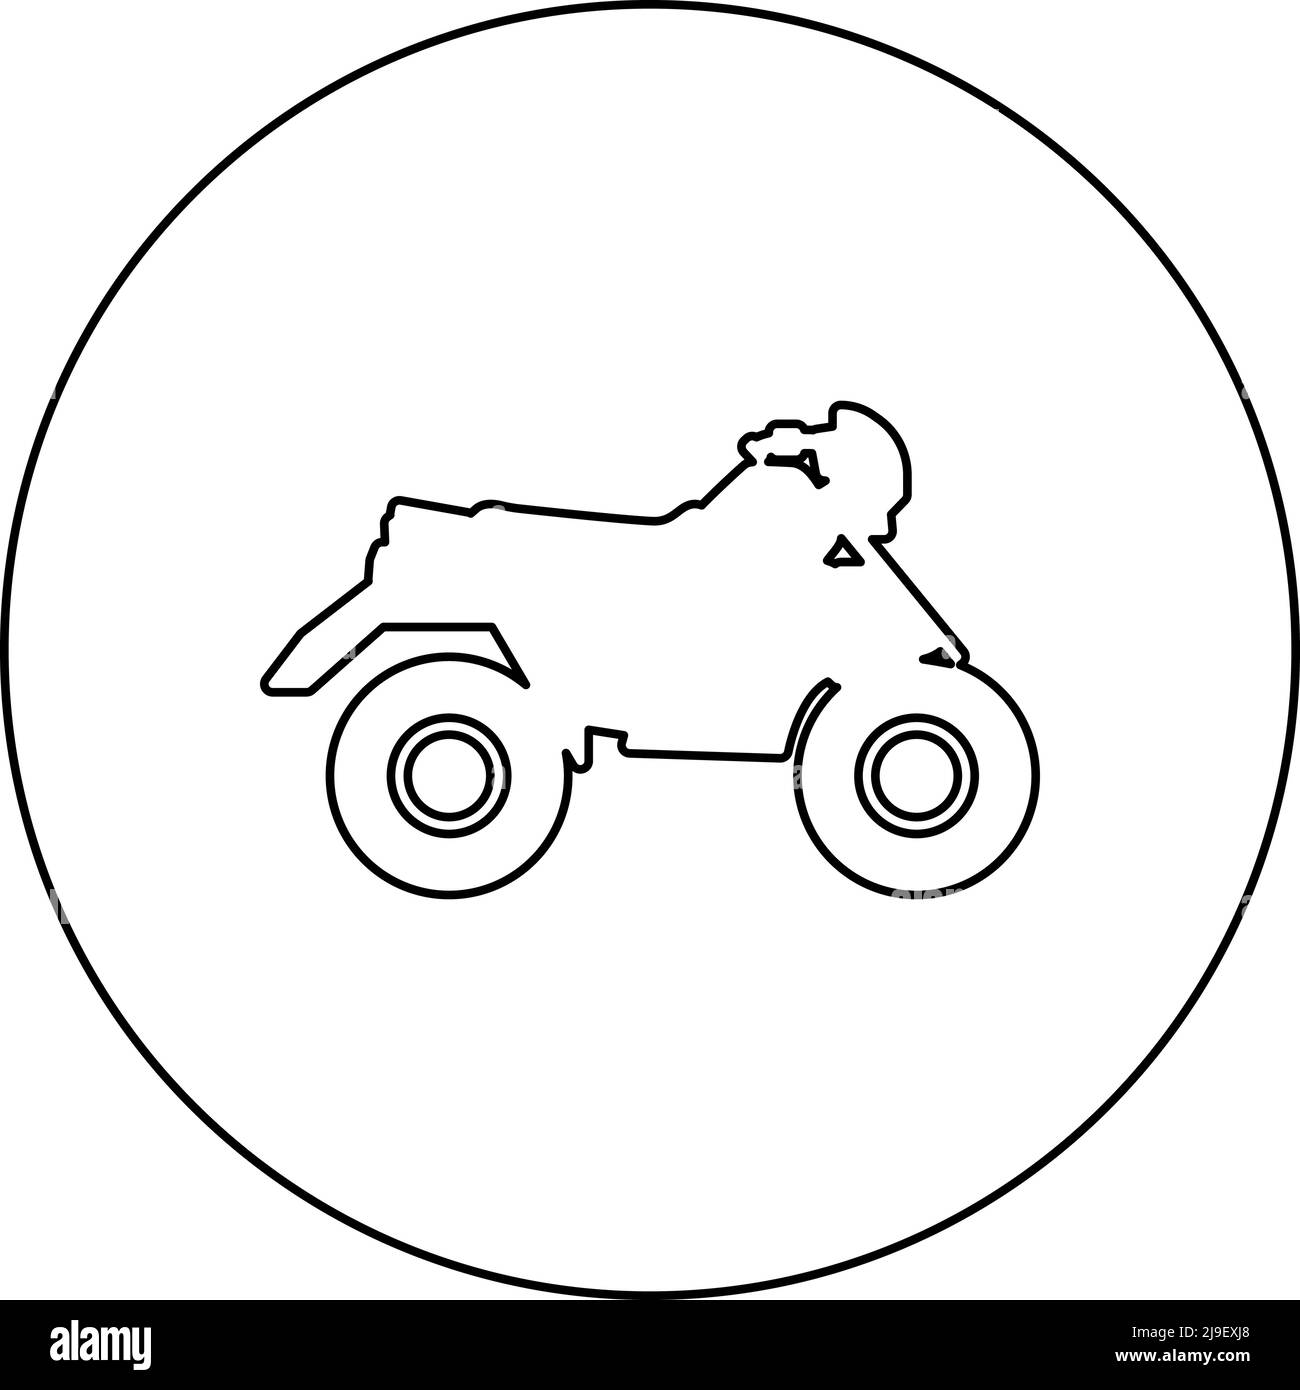 Quad bike ATV moto for ride racing all terrain vehicle icon in circle round black color vector illustration image outline contour line thin style Stock Vector